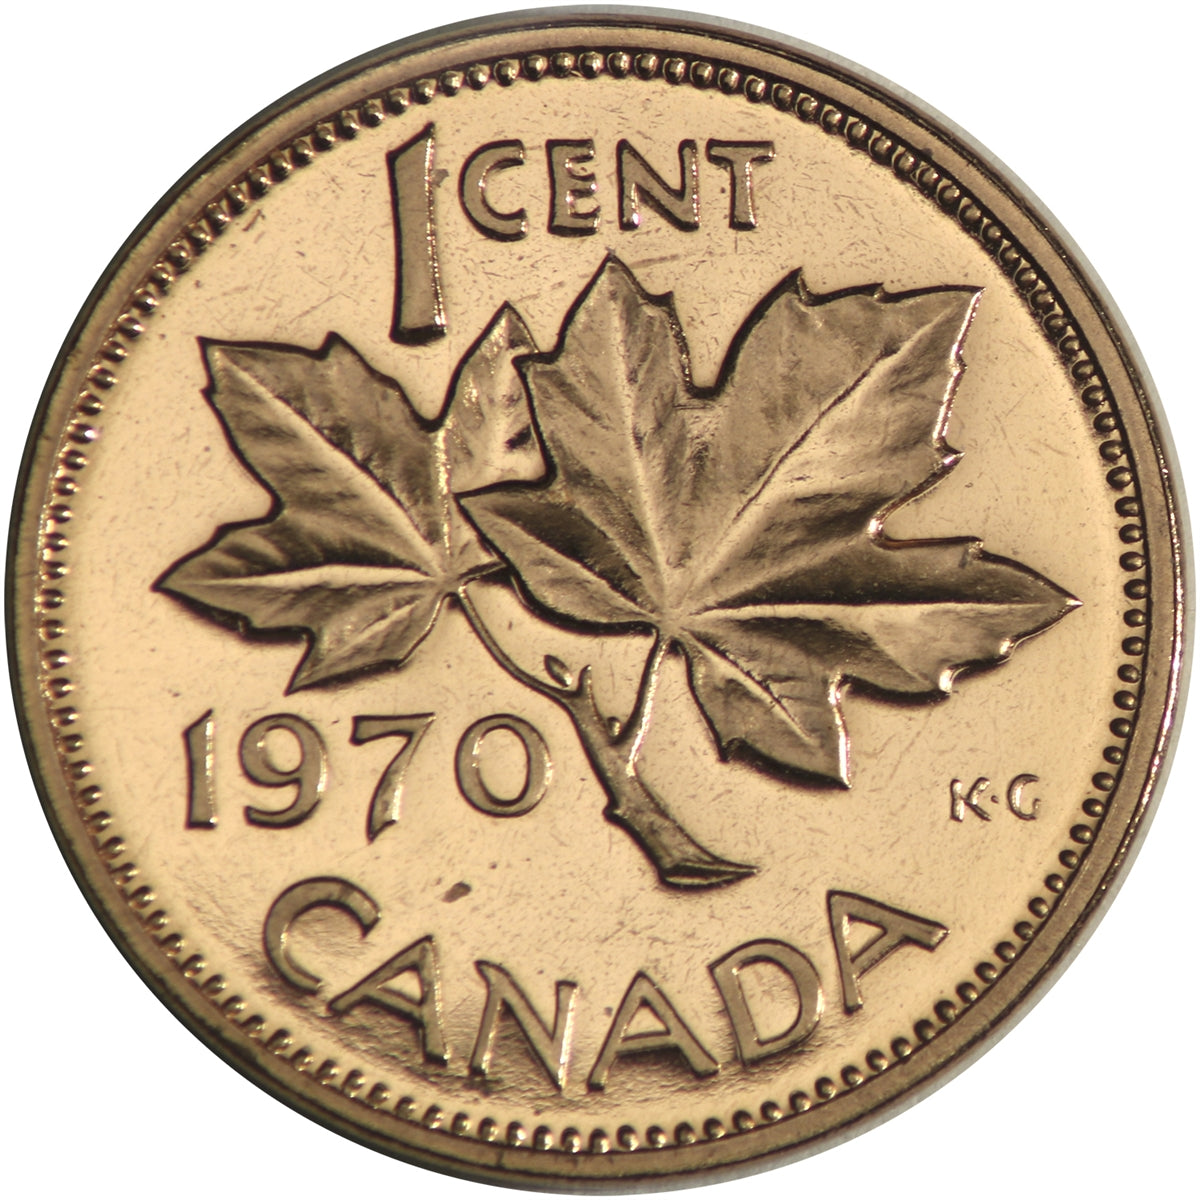 1970 Canada 1-cent Proof Like